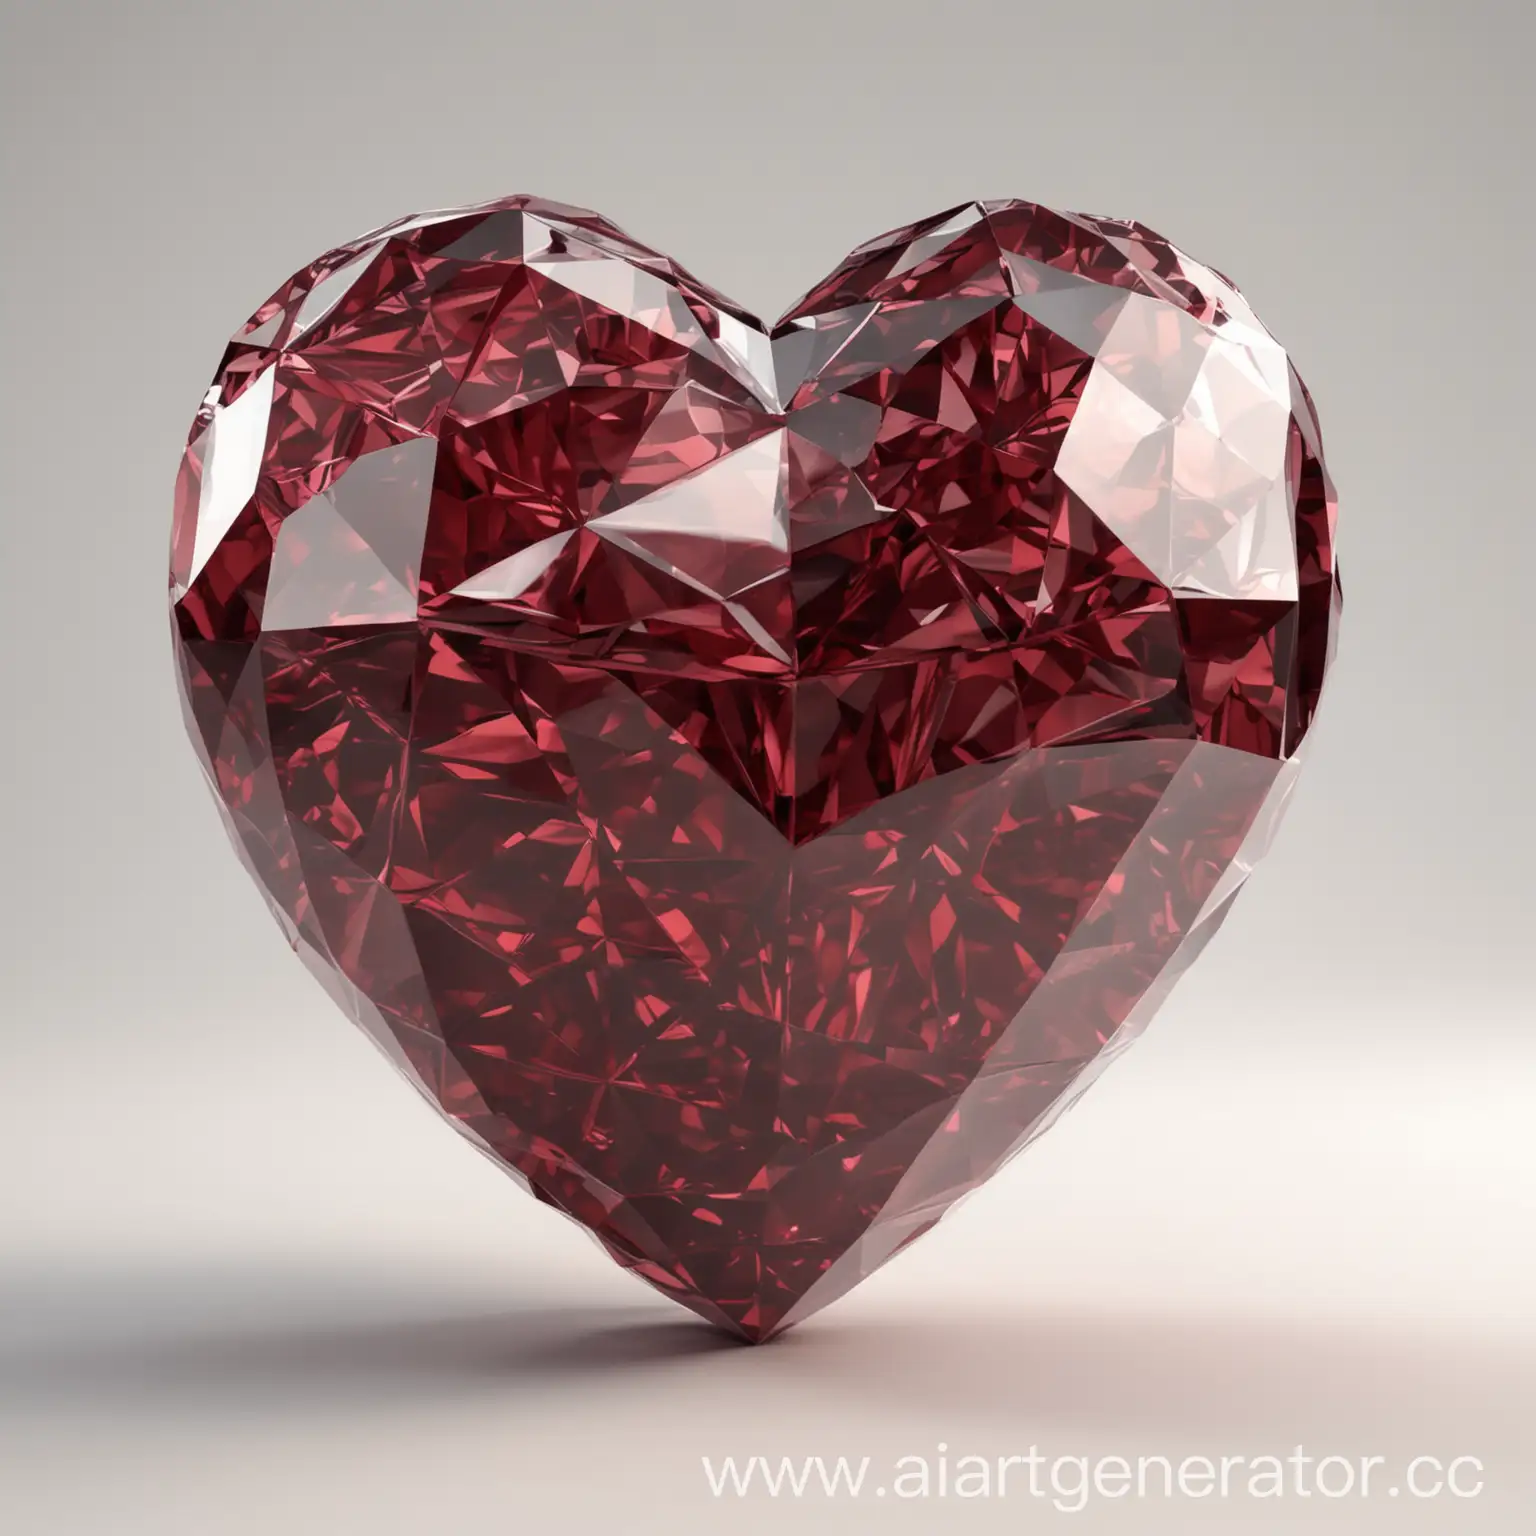 Bordeaux-Colored-Faceted-3D-Heart-on-White-Background